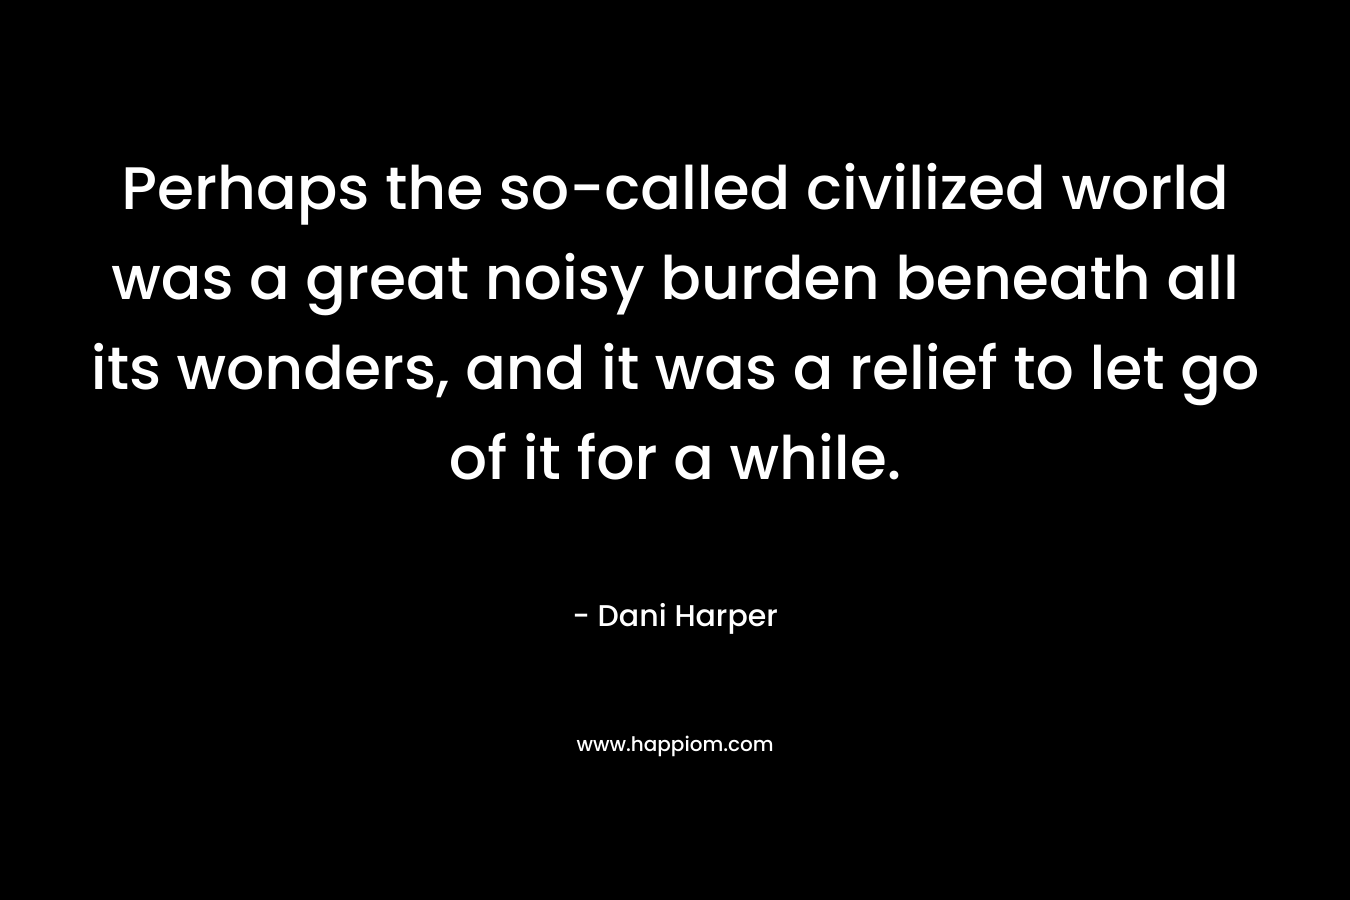 Perhaps the so-called civilized world was a great noisy burden beneath all its wonders, and it was a relief to let go of it for a while. – Dani Harper